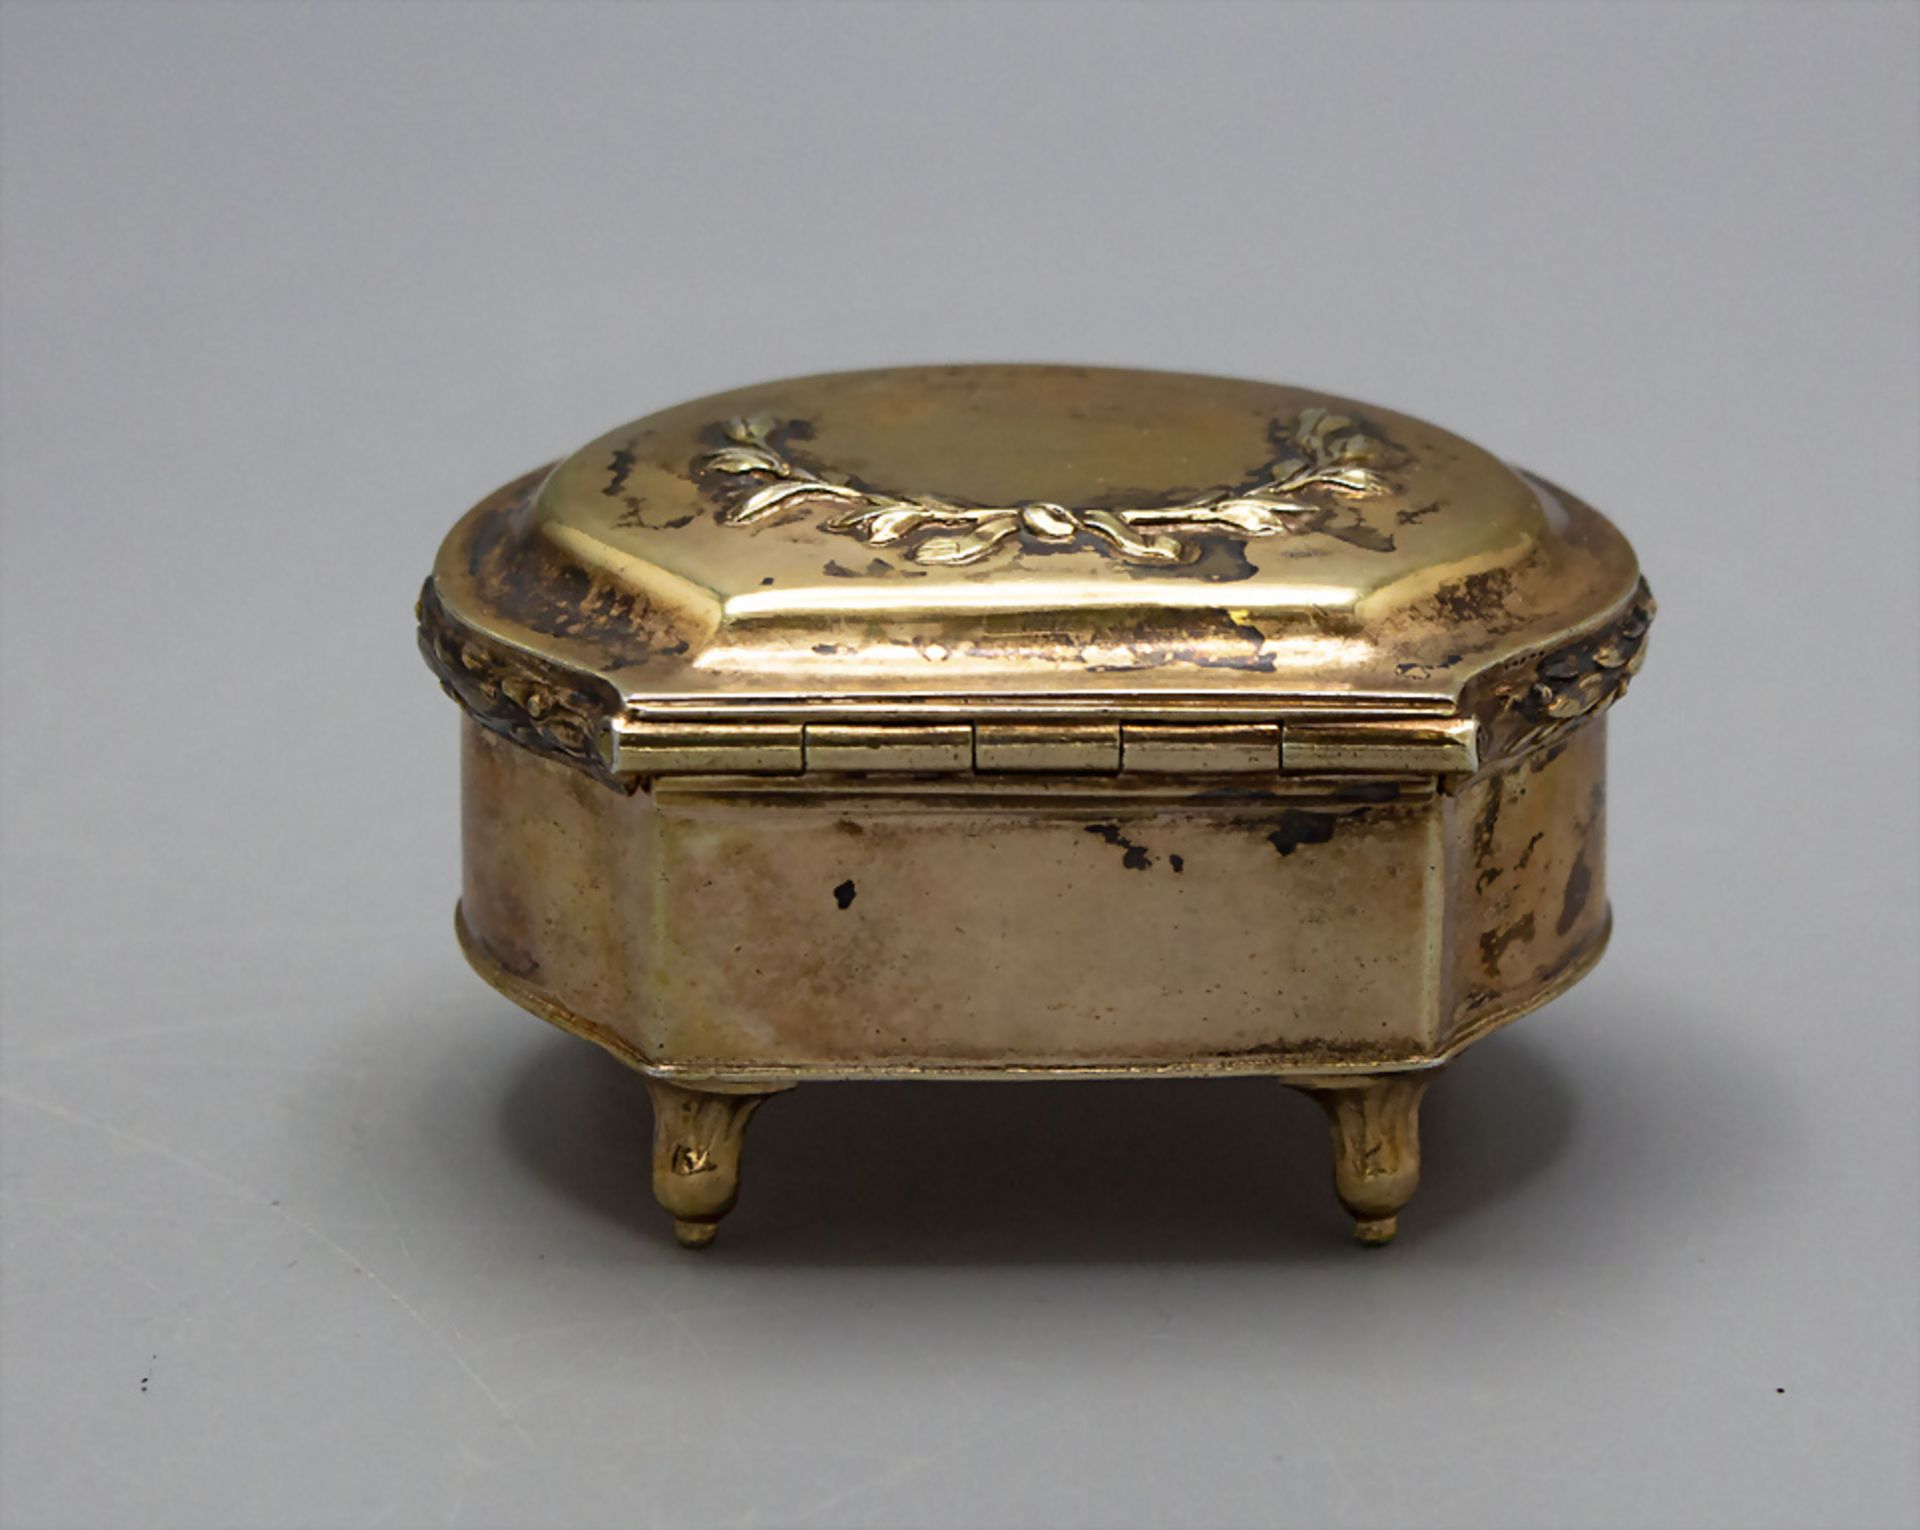 Louis-Seize Tabatiere / A silver snuff box / tobacco box, Samuel Bardet, Augsburg, 1785-1787 - Image 3 of 6